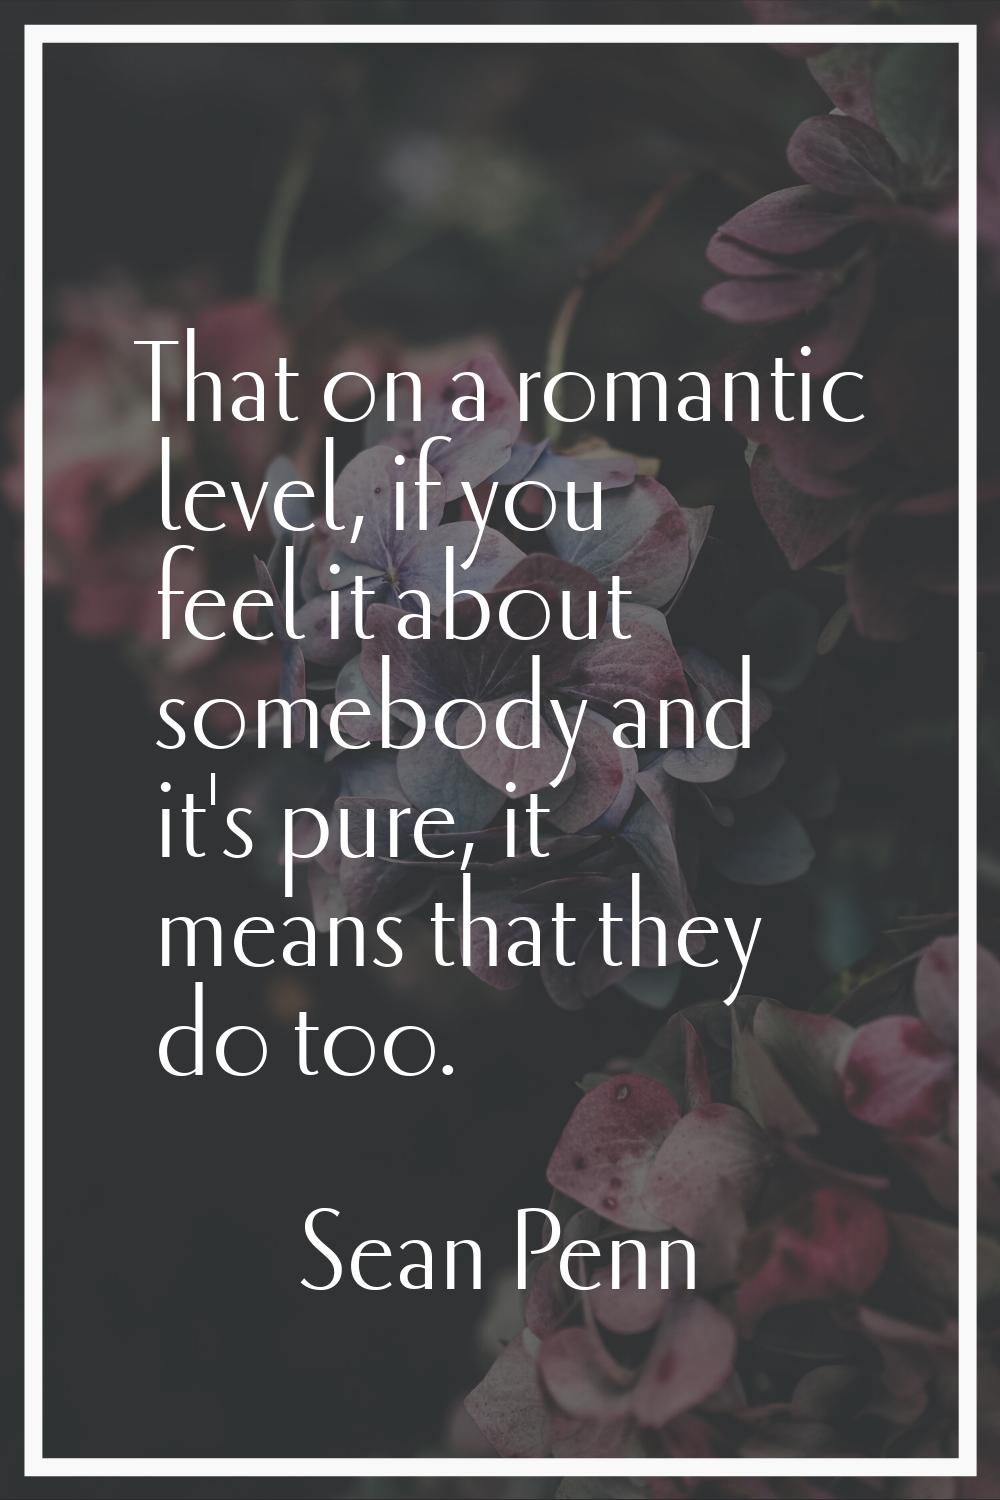 That on a romantic level, if you feel it about somebody and it's pure, it means that they do too.